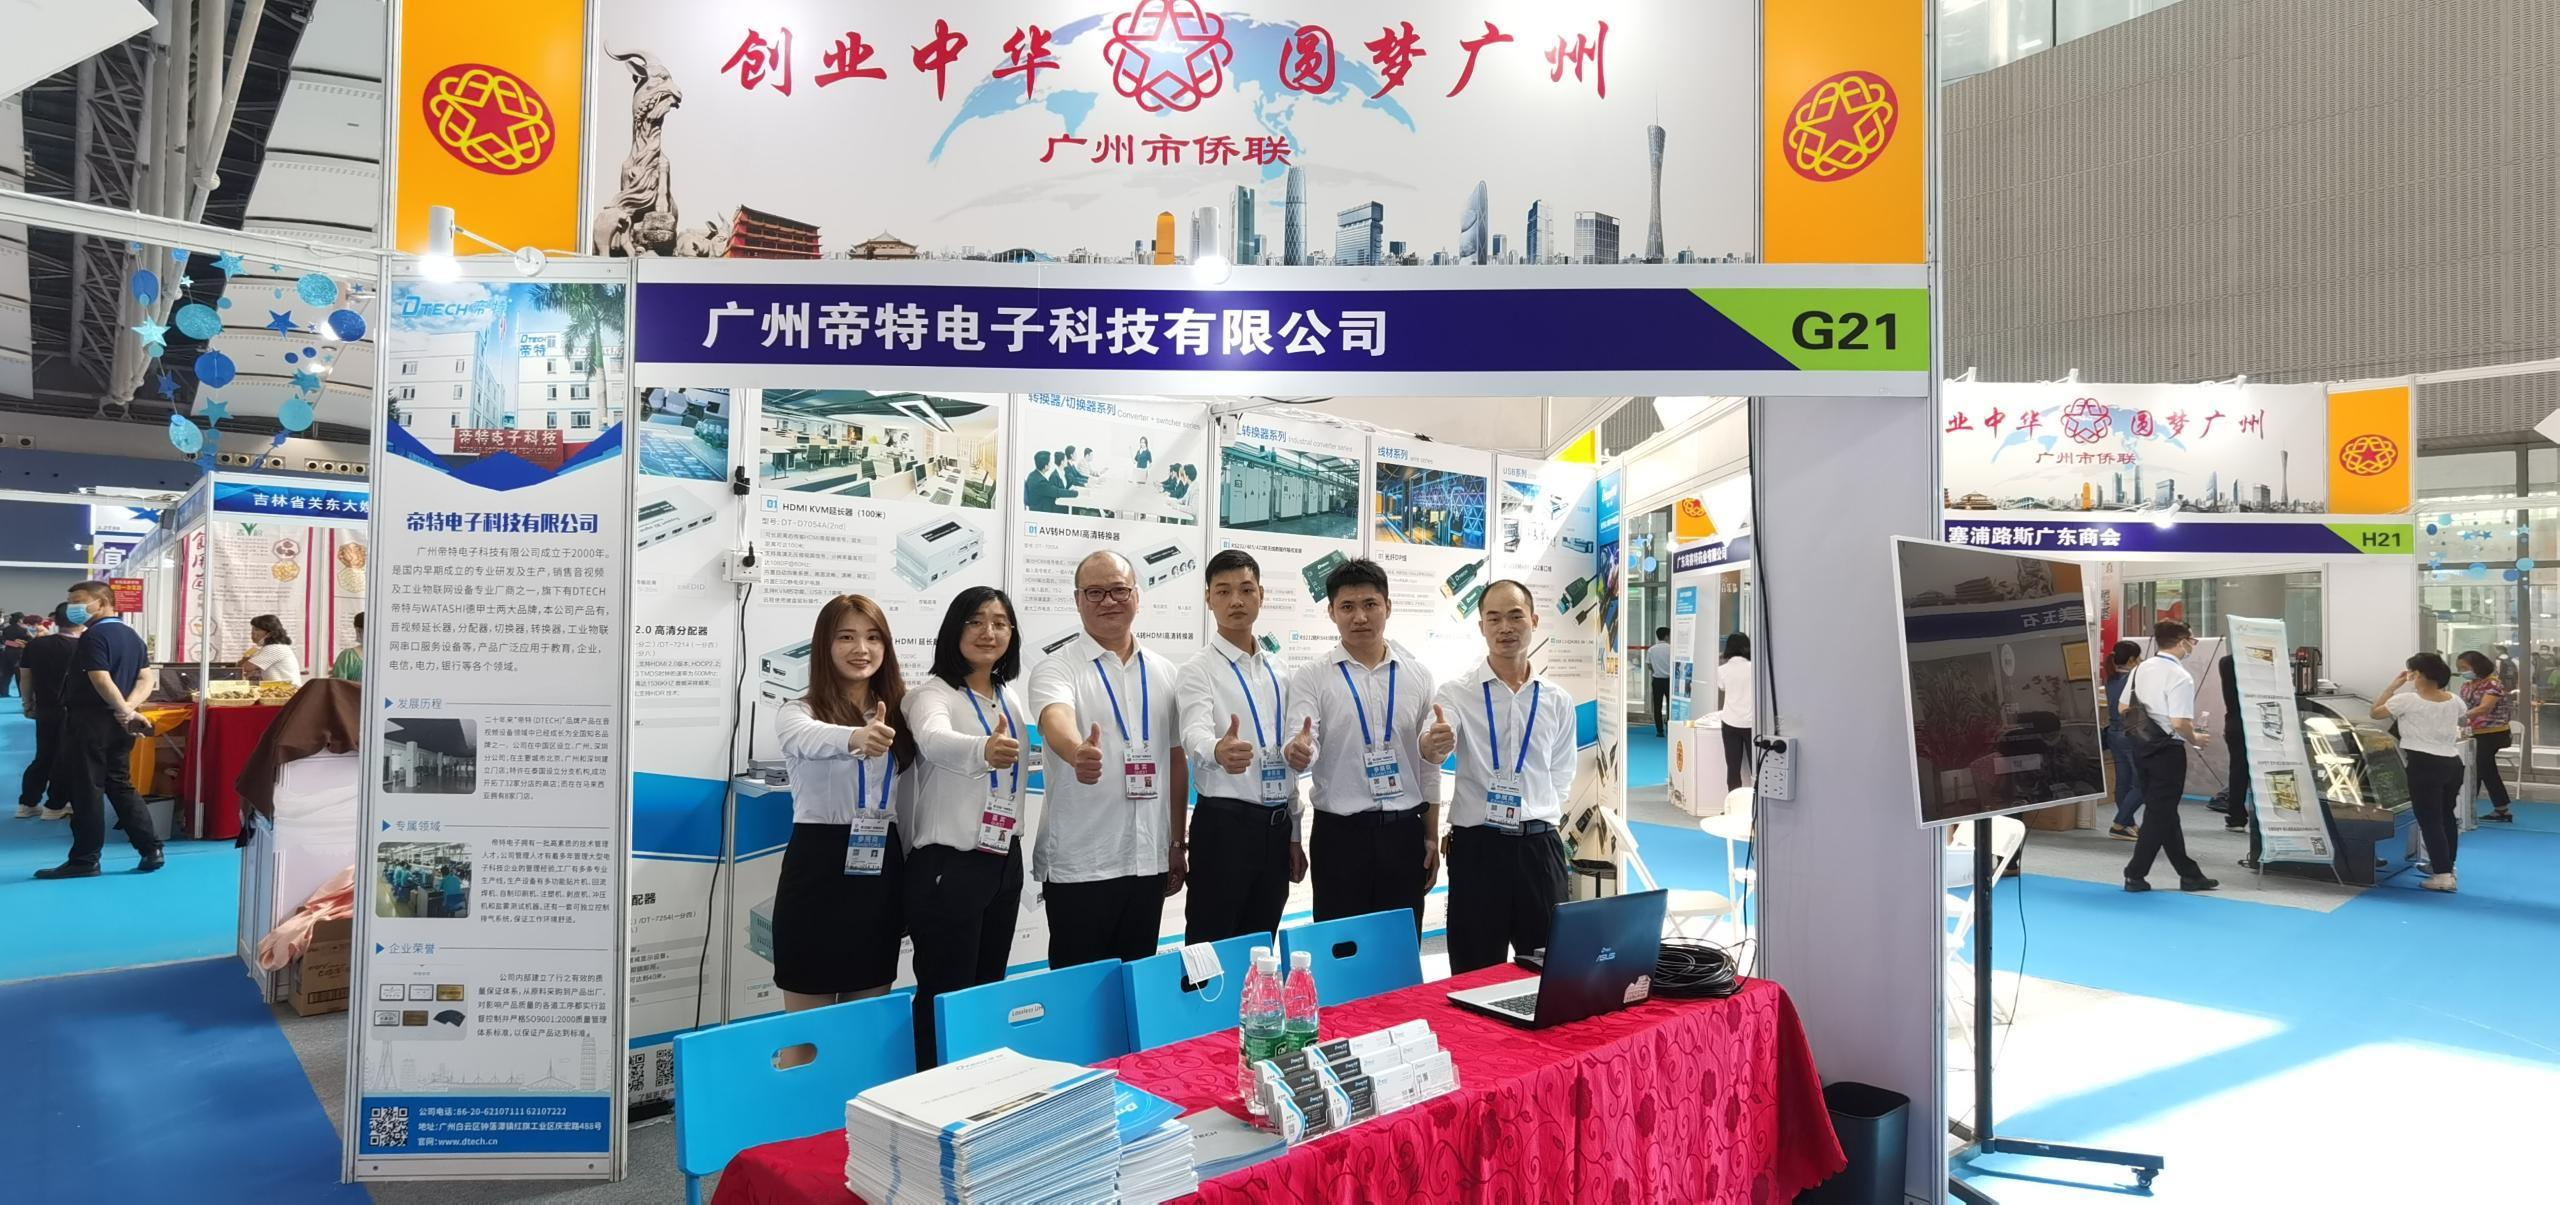 Congratulations | The 28th Guangzhou Expo has successfully concluded, and Dtech and 